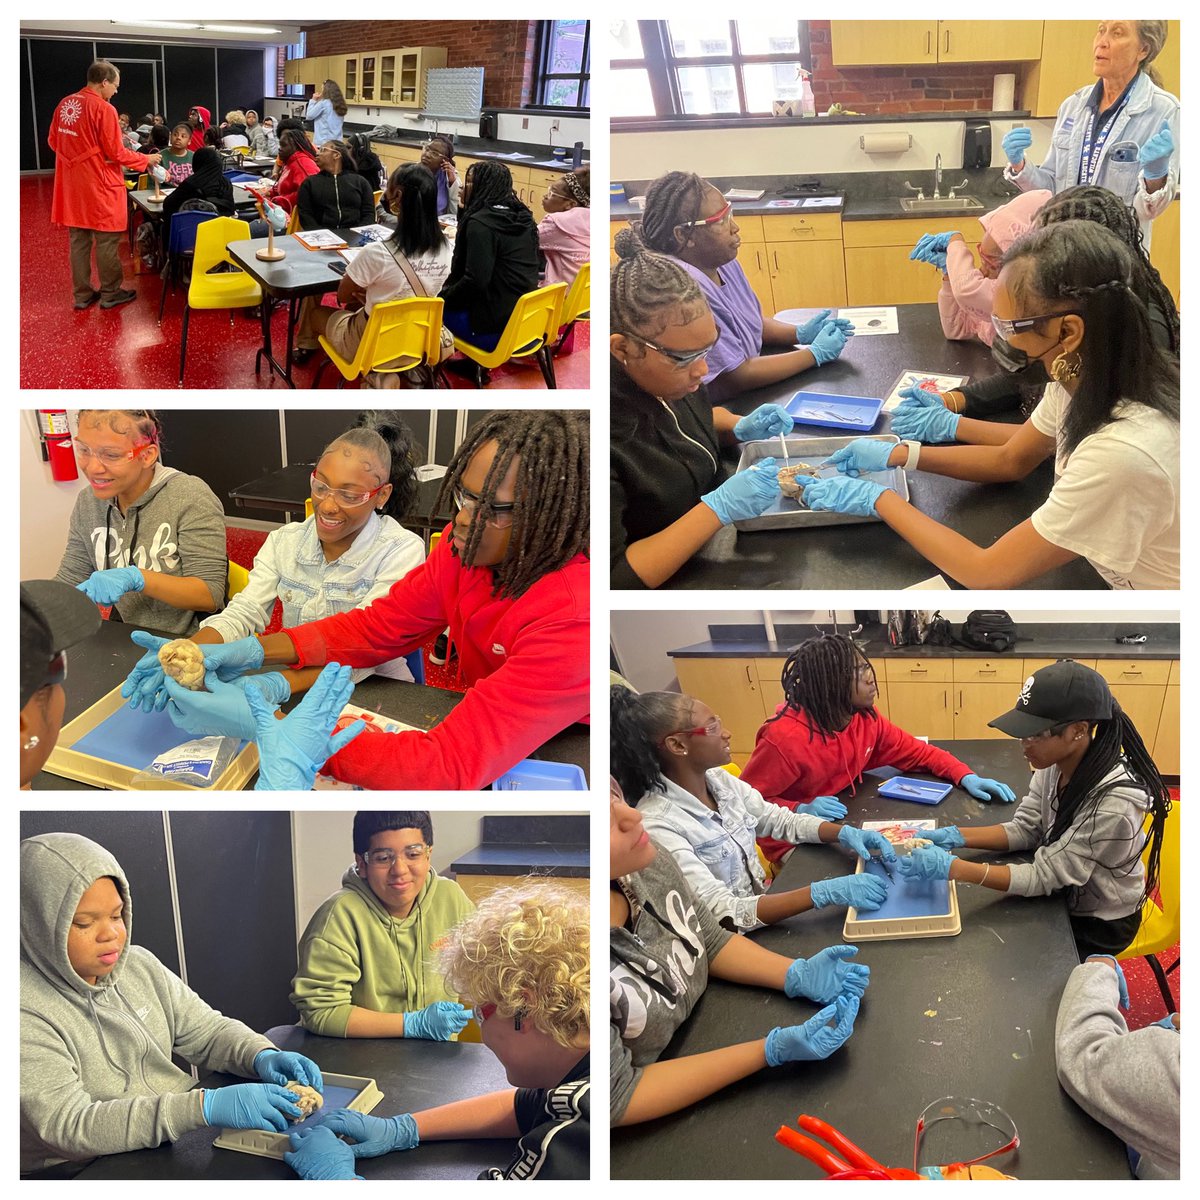 Healthcare Science students enjoyed @KYScience Pulse of Surgery, watching a coronary artery bypass live & asking questions of the UofL surgical team during the procedure. This was followed by a sheep heart dissection activity & a lunch meeting. w/ UofL med student. 💙💛